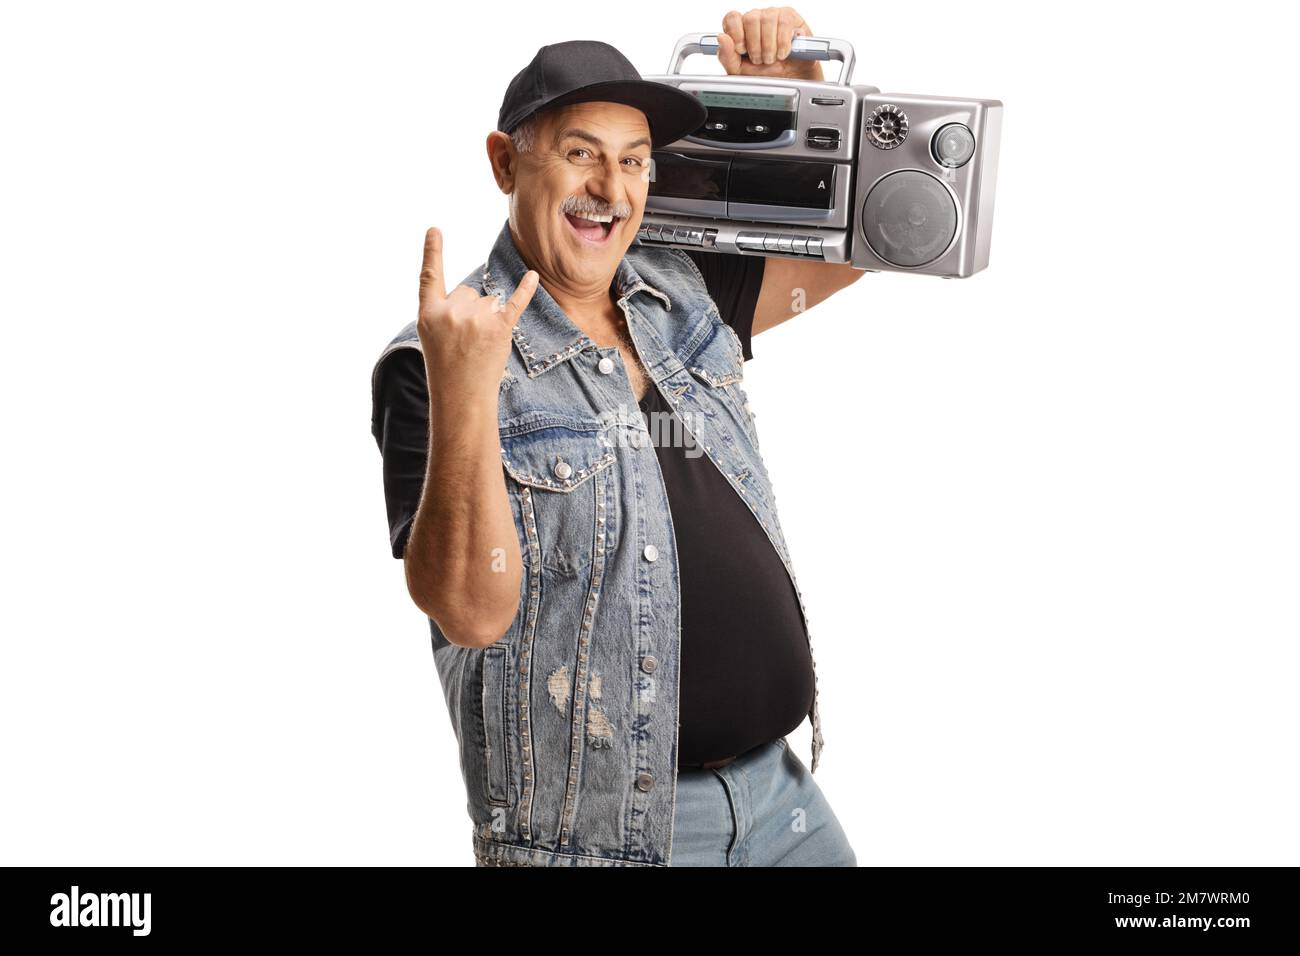 Cheerful mature man carrying a boombox radio and gesturing rock and roll sign isolated on white background Stock Photo